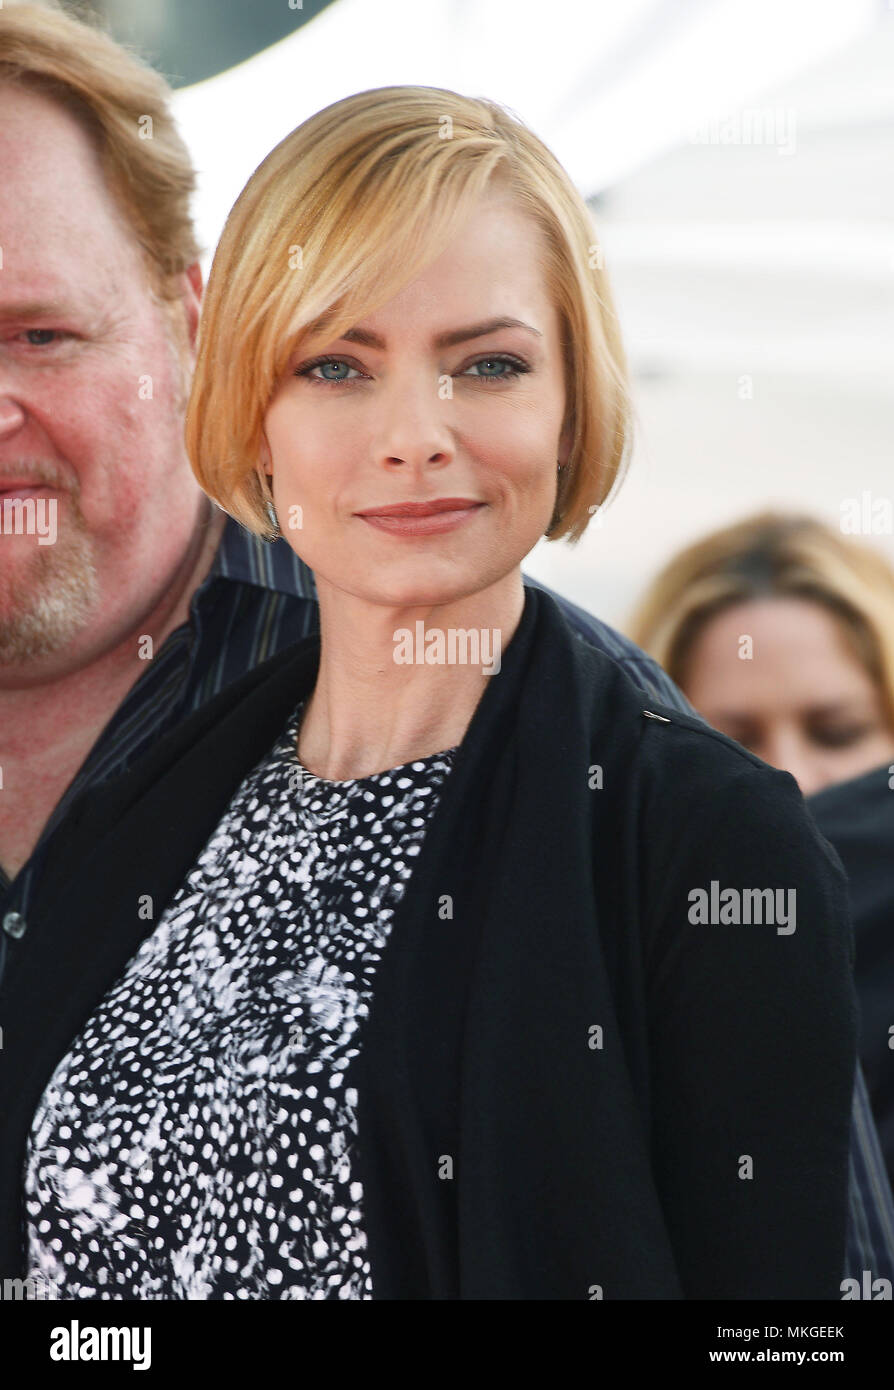 Jaime Pressly 029  Allison Janney honored with a Star on the Hollywood Walk of Fame in Los Angeles. October 17, 2016.Jaime Pressly 029  Event in Hollywood Life - California,  Red Carpet Event, Vertical, USA, Film Industry, Celebrities,  Photography, Bestof, Arts Culture and Entertainment, Topix Celebrities fashion / one person, Vertical, Best of, Hollywood Life, Event in Hollywood Life - California,  Red Carpet and backstage, USA, Film Industry, Celebrities,  movie celebrities, TV celebrities, Music celebrities, Photography, Bestof, Arts Culture and Entertainment,  Topix, headshot, vertical, f Stock Photo